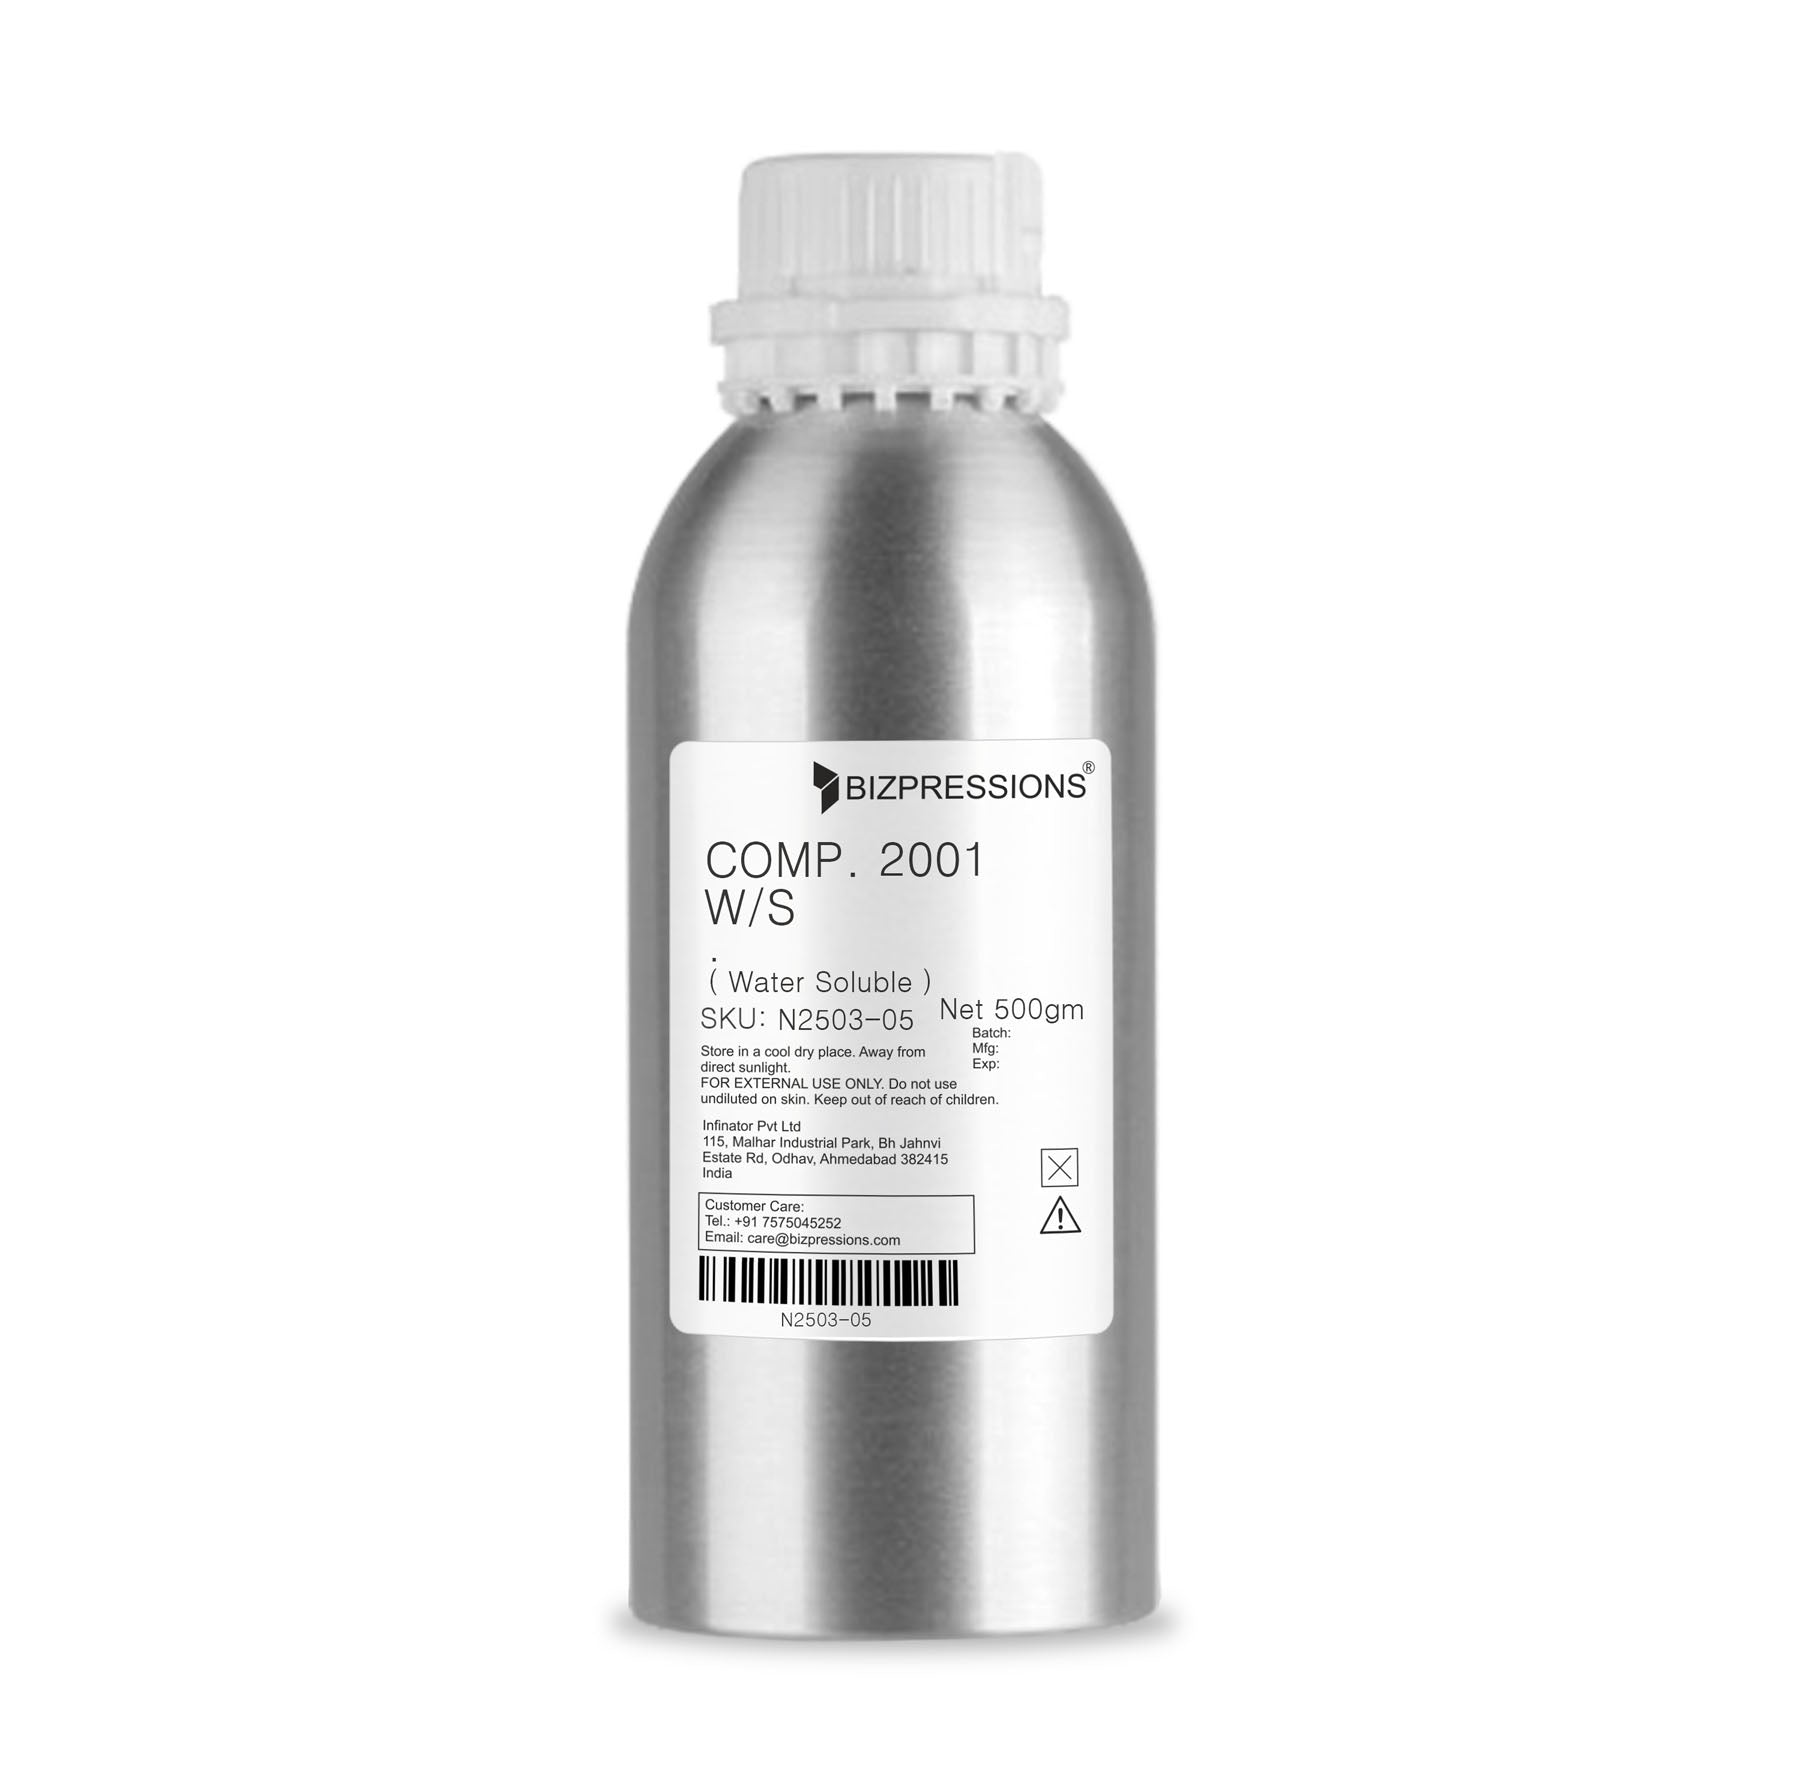 COMP 2001 W/S - Fragrance ( Water Soluble ) - 500 gm